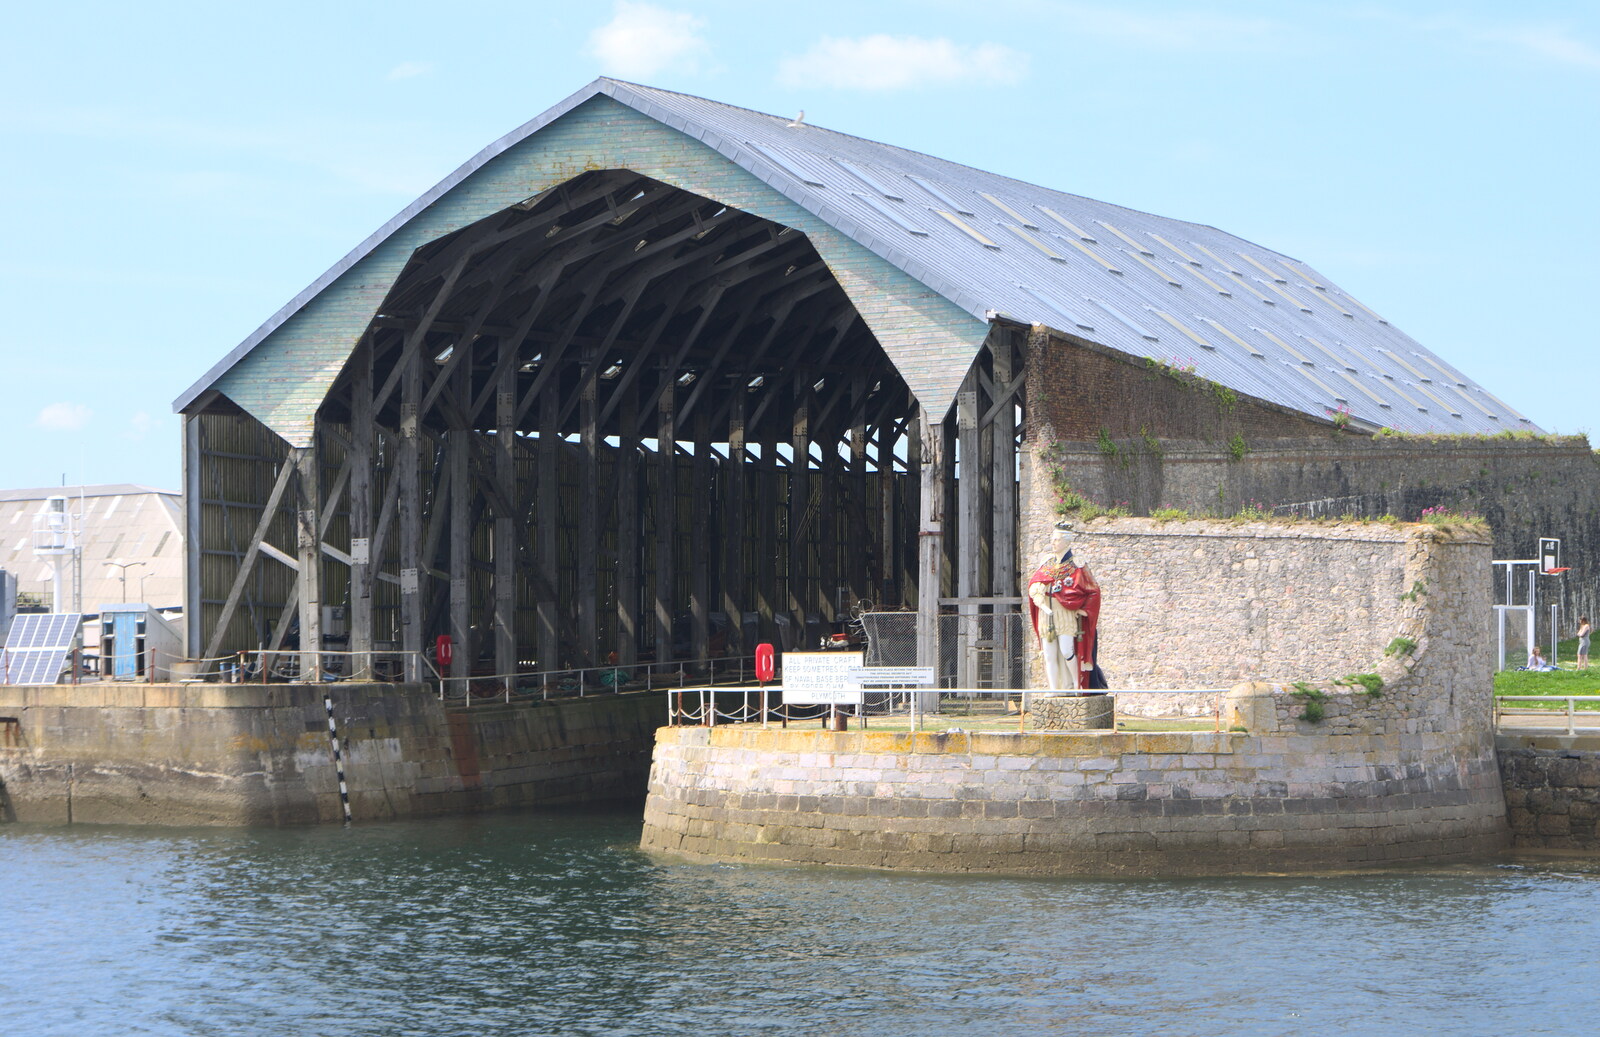 An old boatshed down at Devonport from A Tamar River Trip, Plymouth, Devon - 30th May 2016